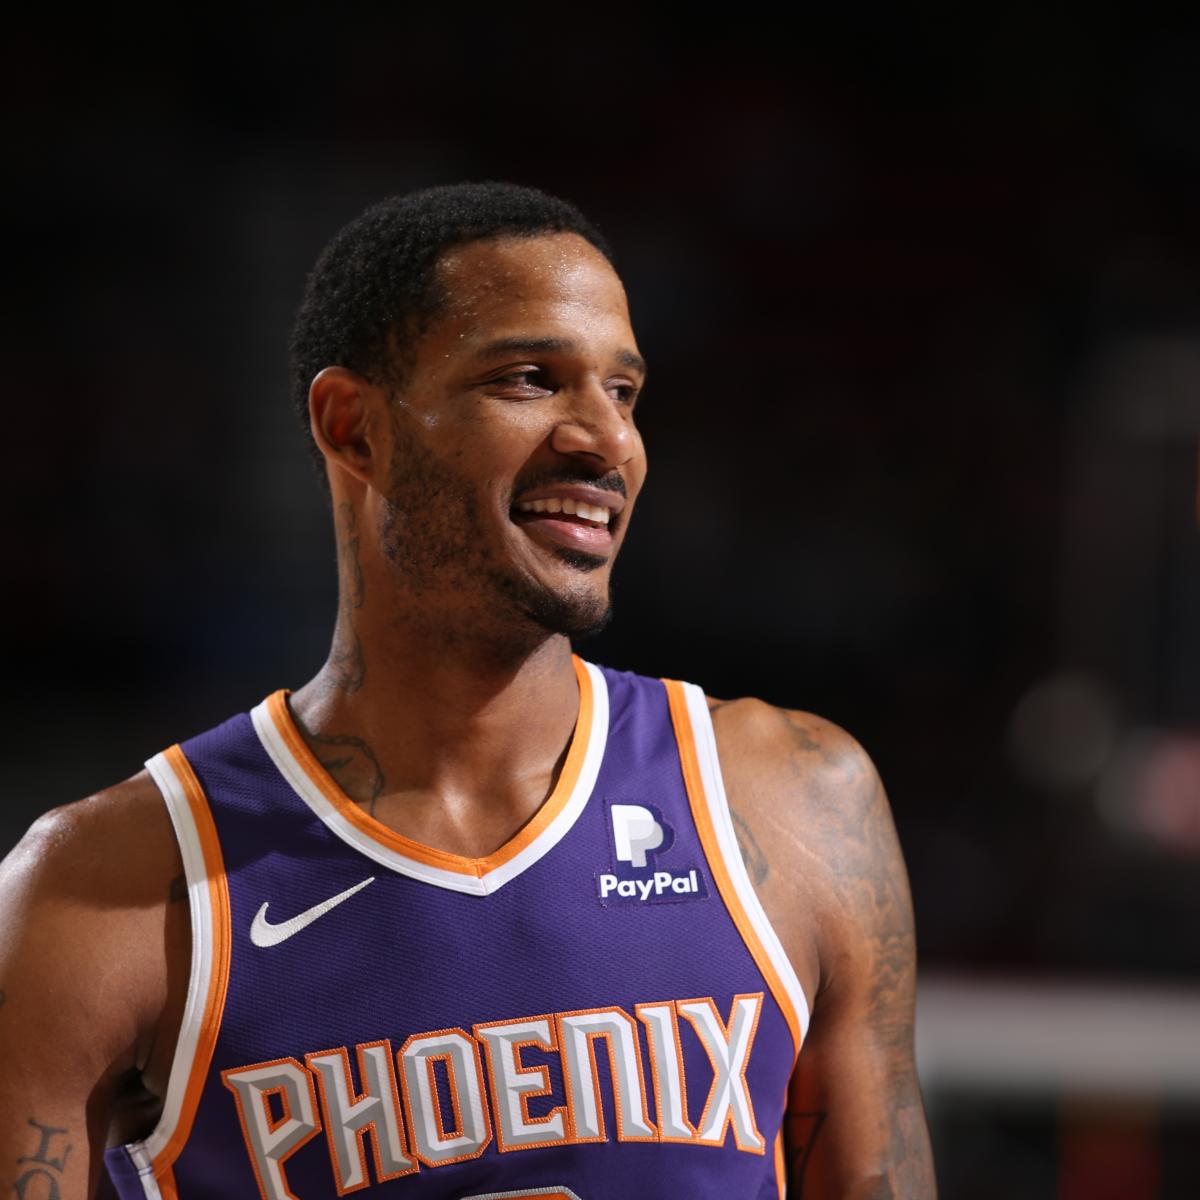 Nba Trade Rumors Latest Buzz On Carmelo Anthony Trevor Ariza And More Bleacher Report Latest News Videos And Highlights